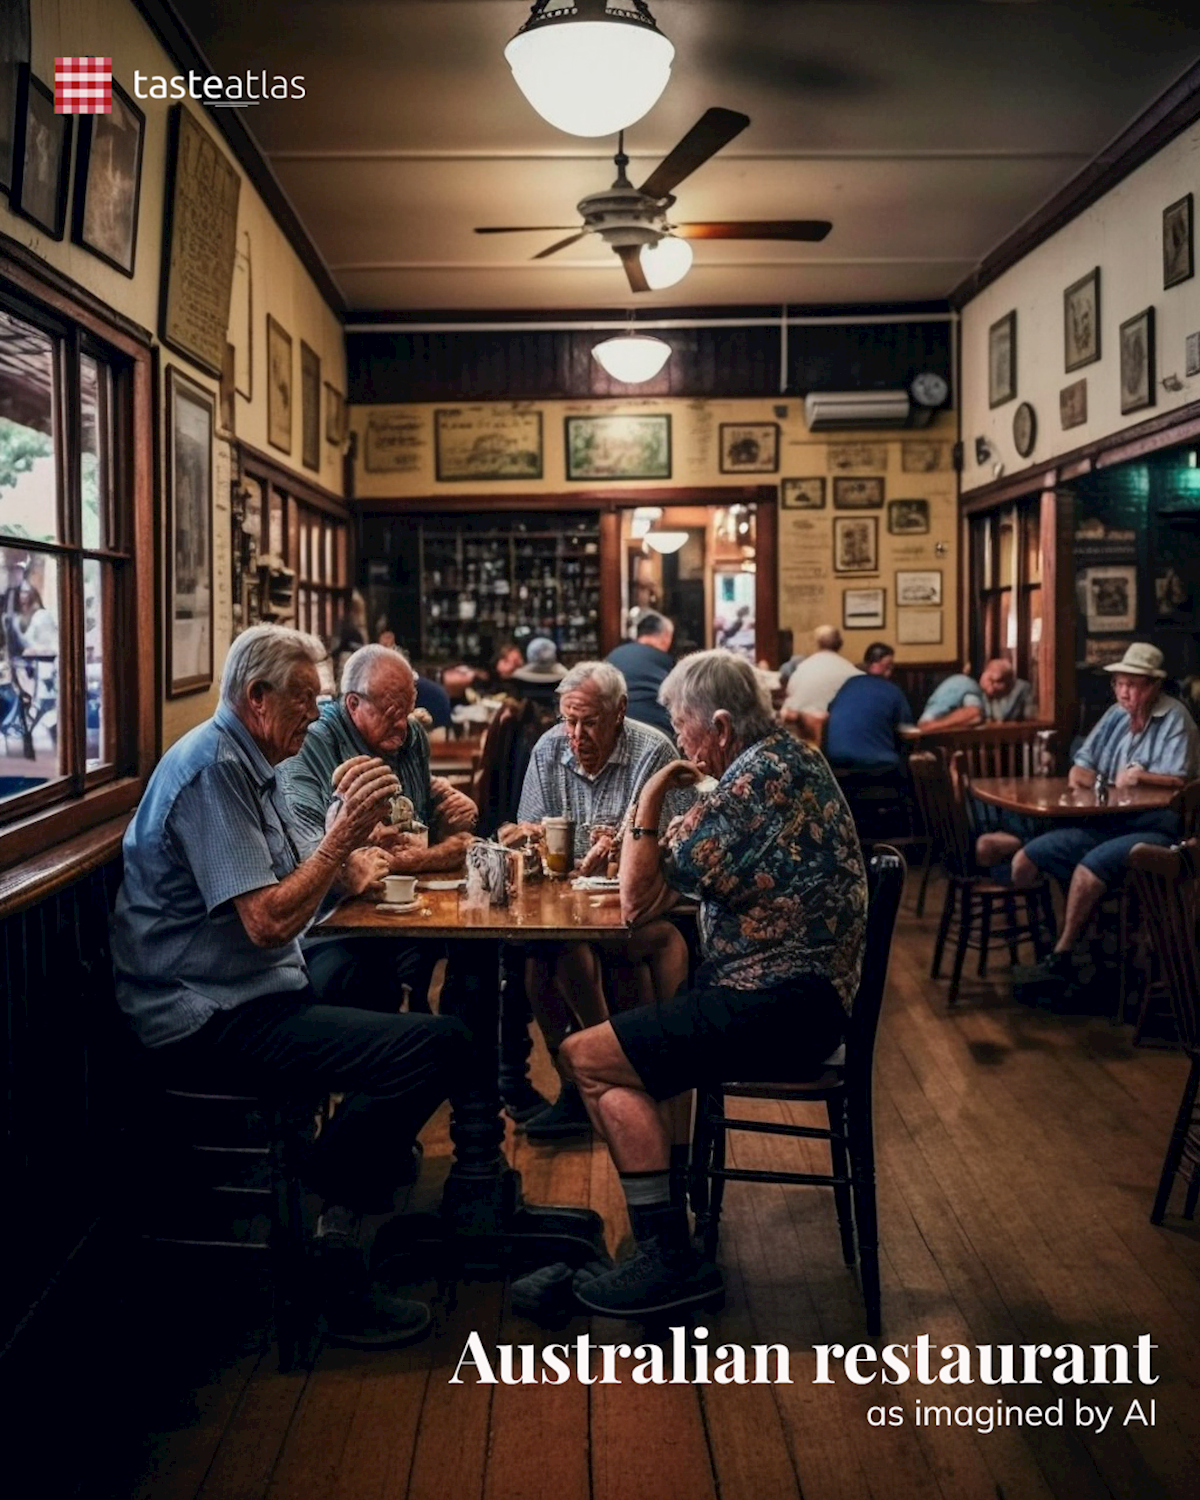 Prompt: Imagine locals eating in a traditional Australian restaurant